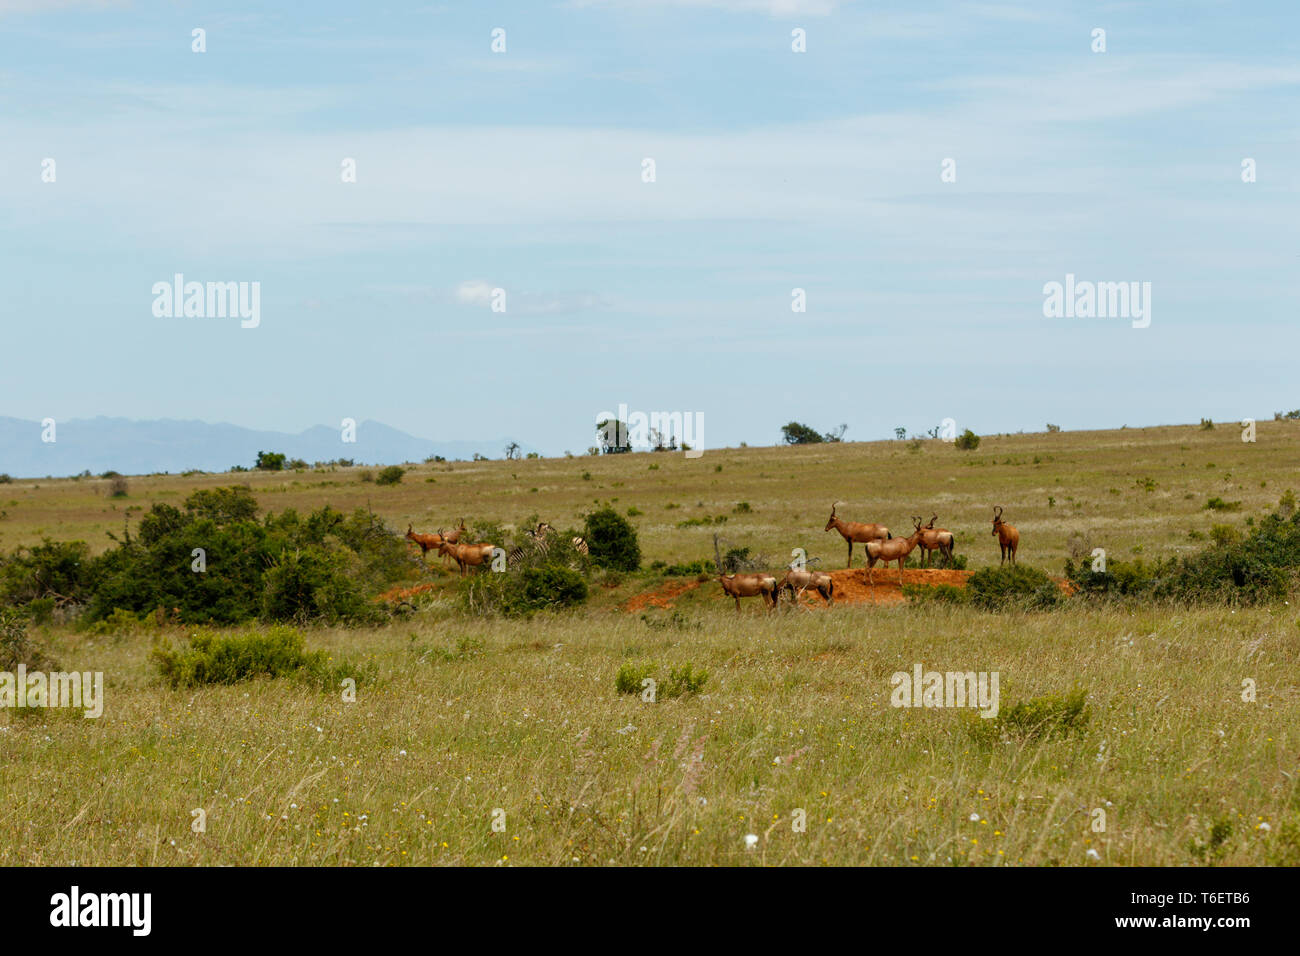 Group of Kudus grazing between the bushes Stock Photo